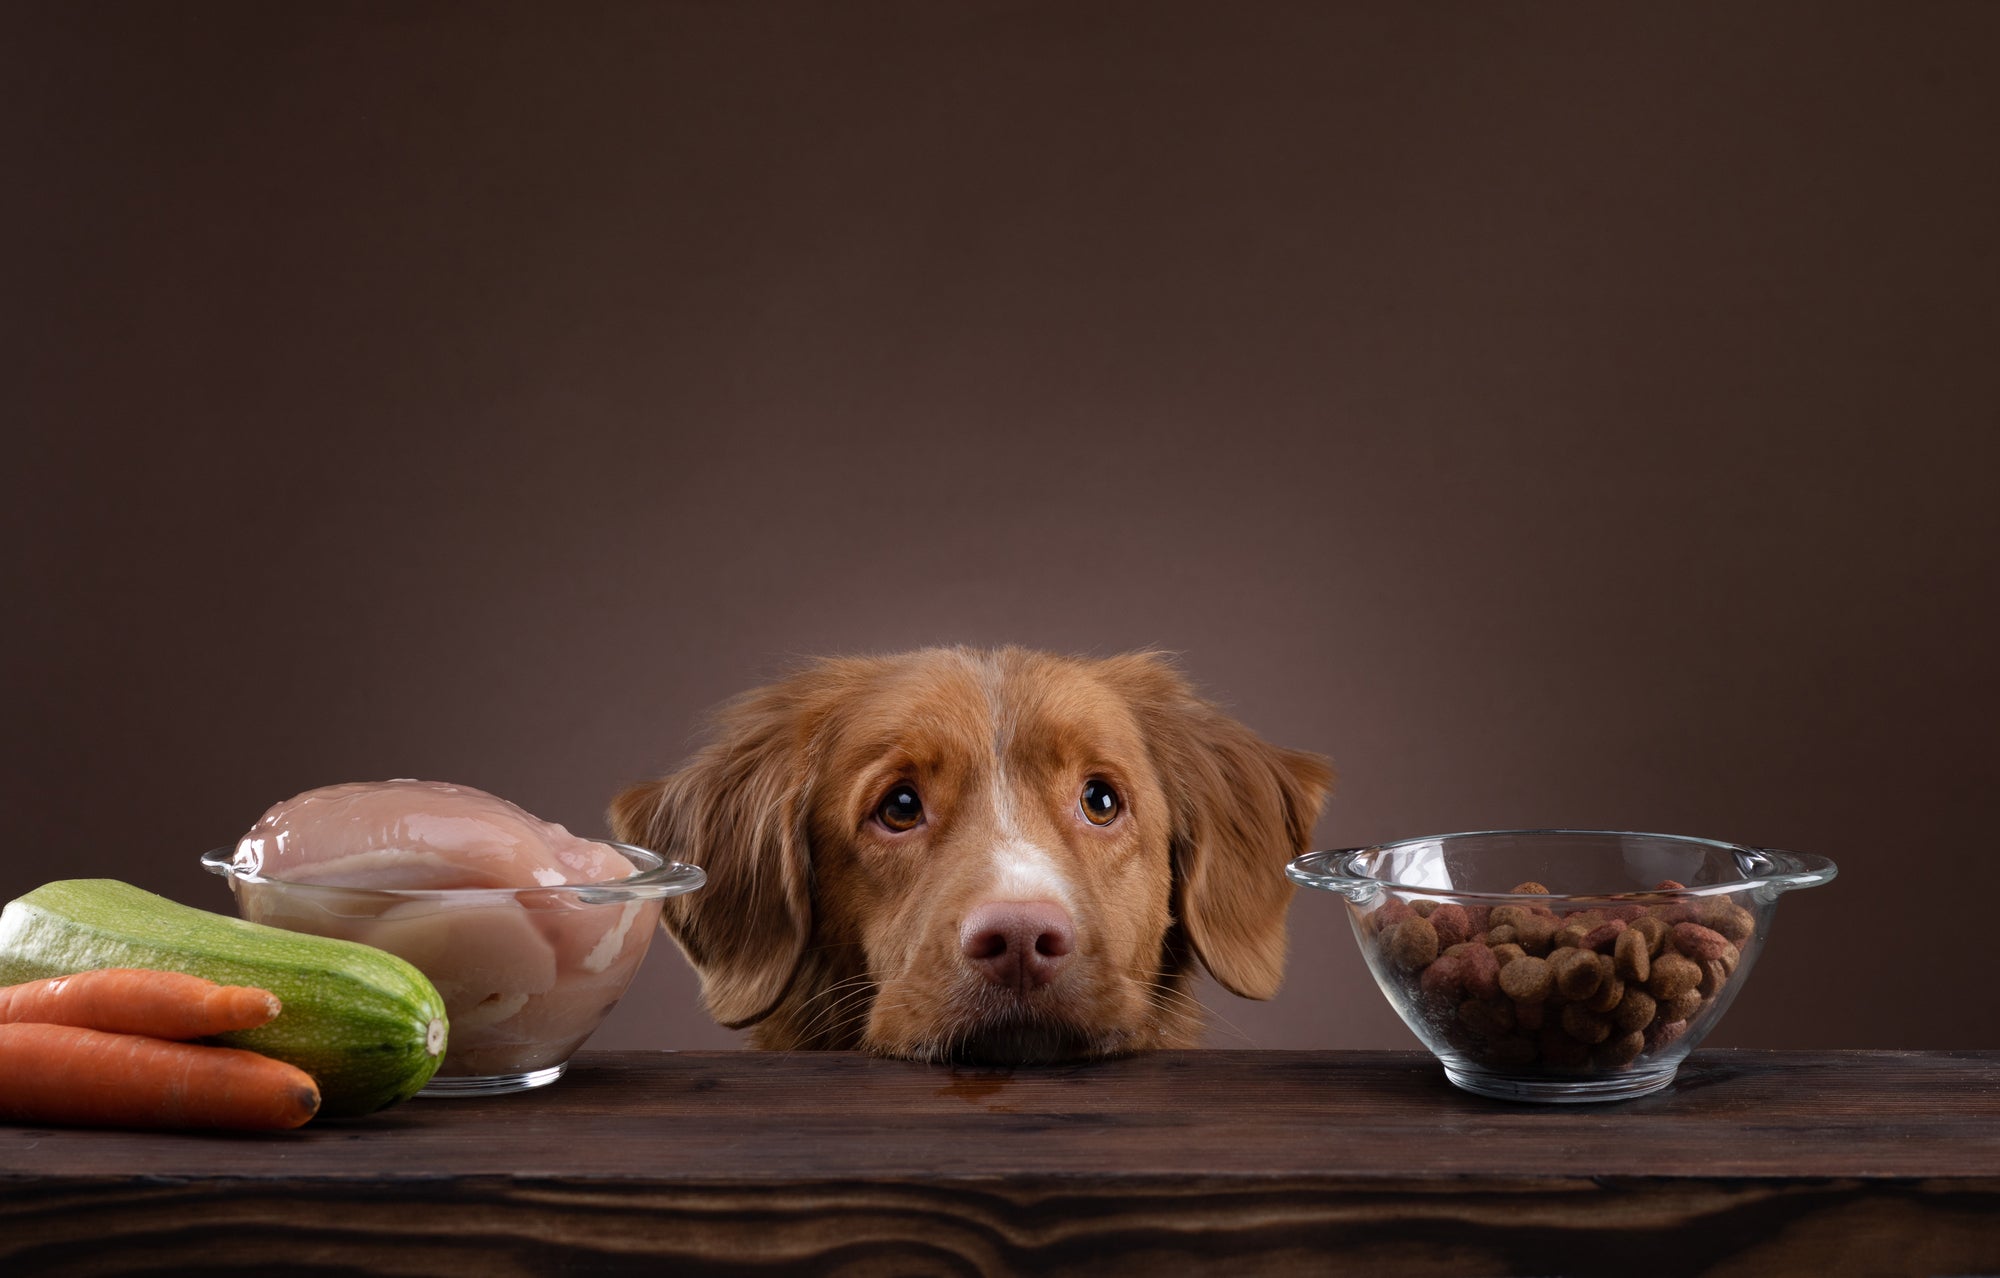 Raw dog food – Is it a good idea or not?